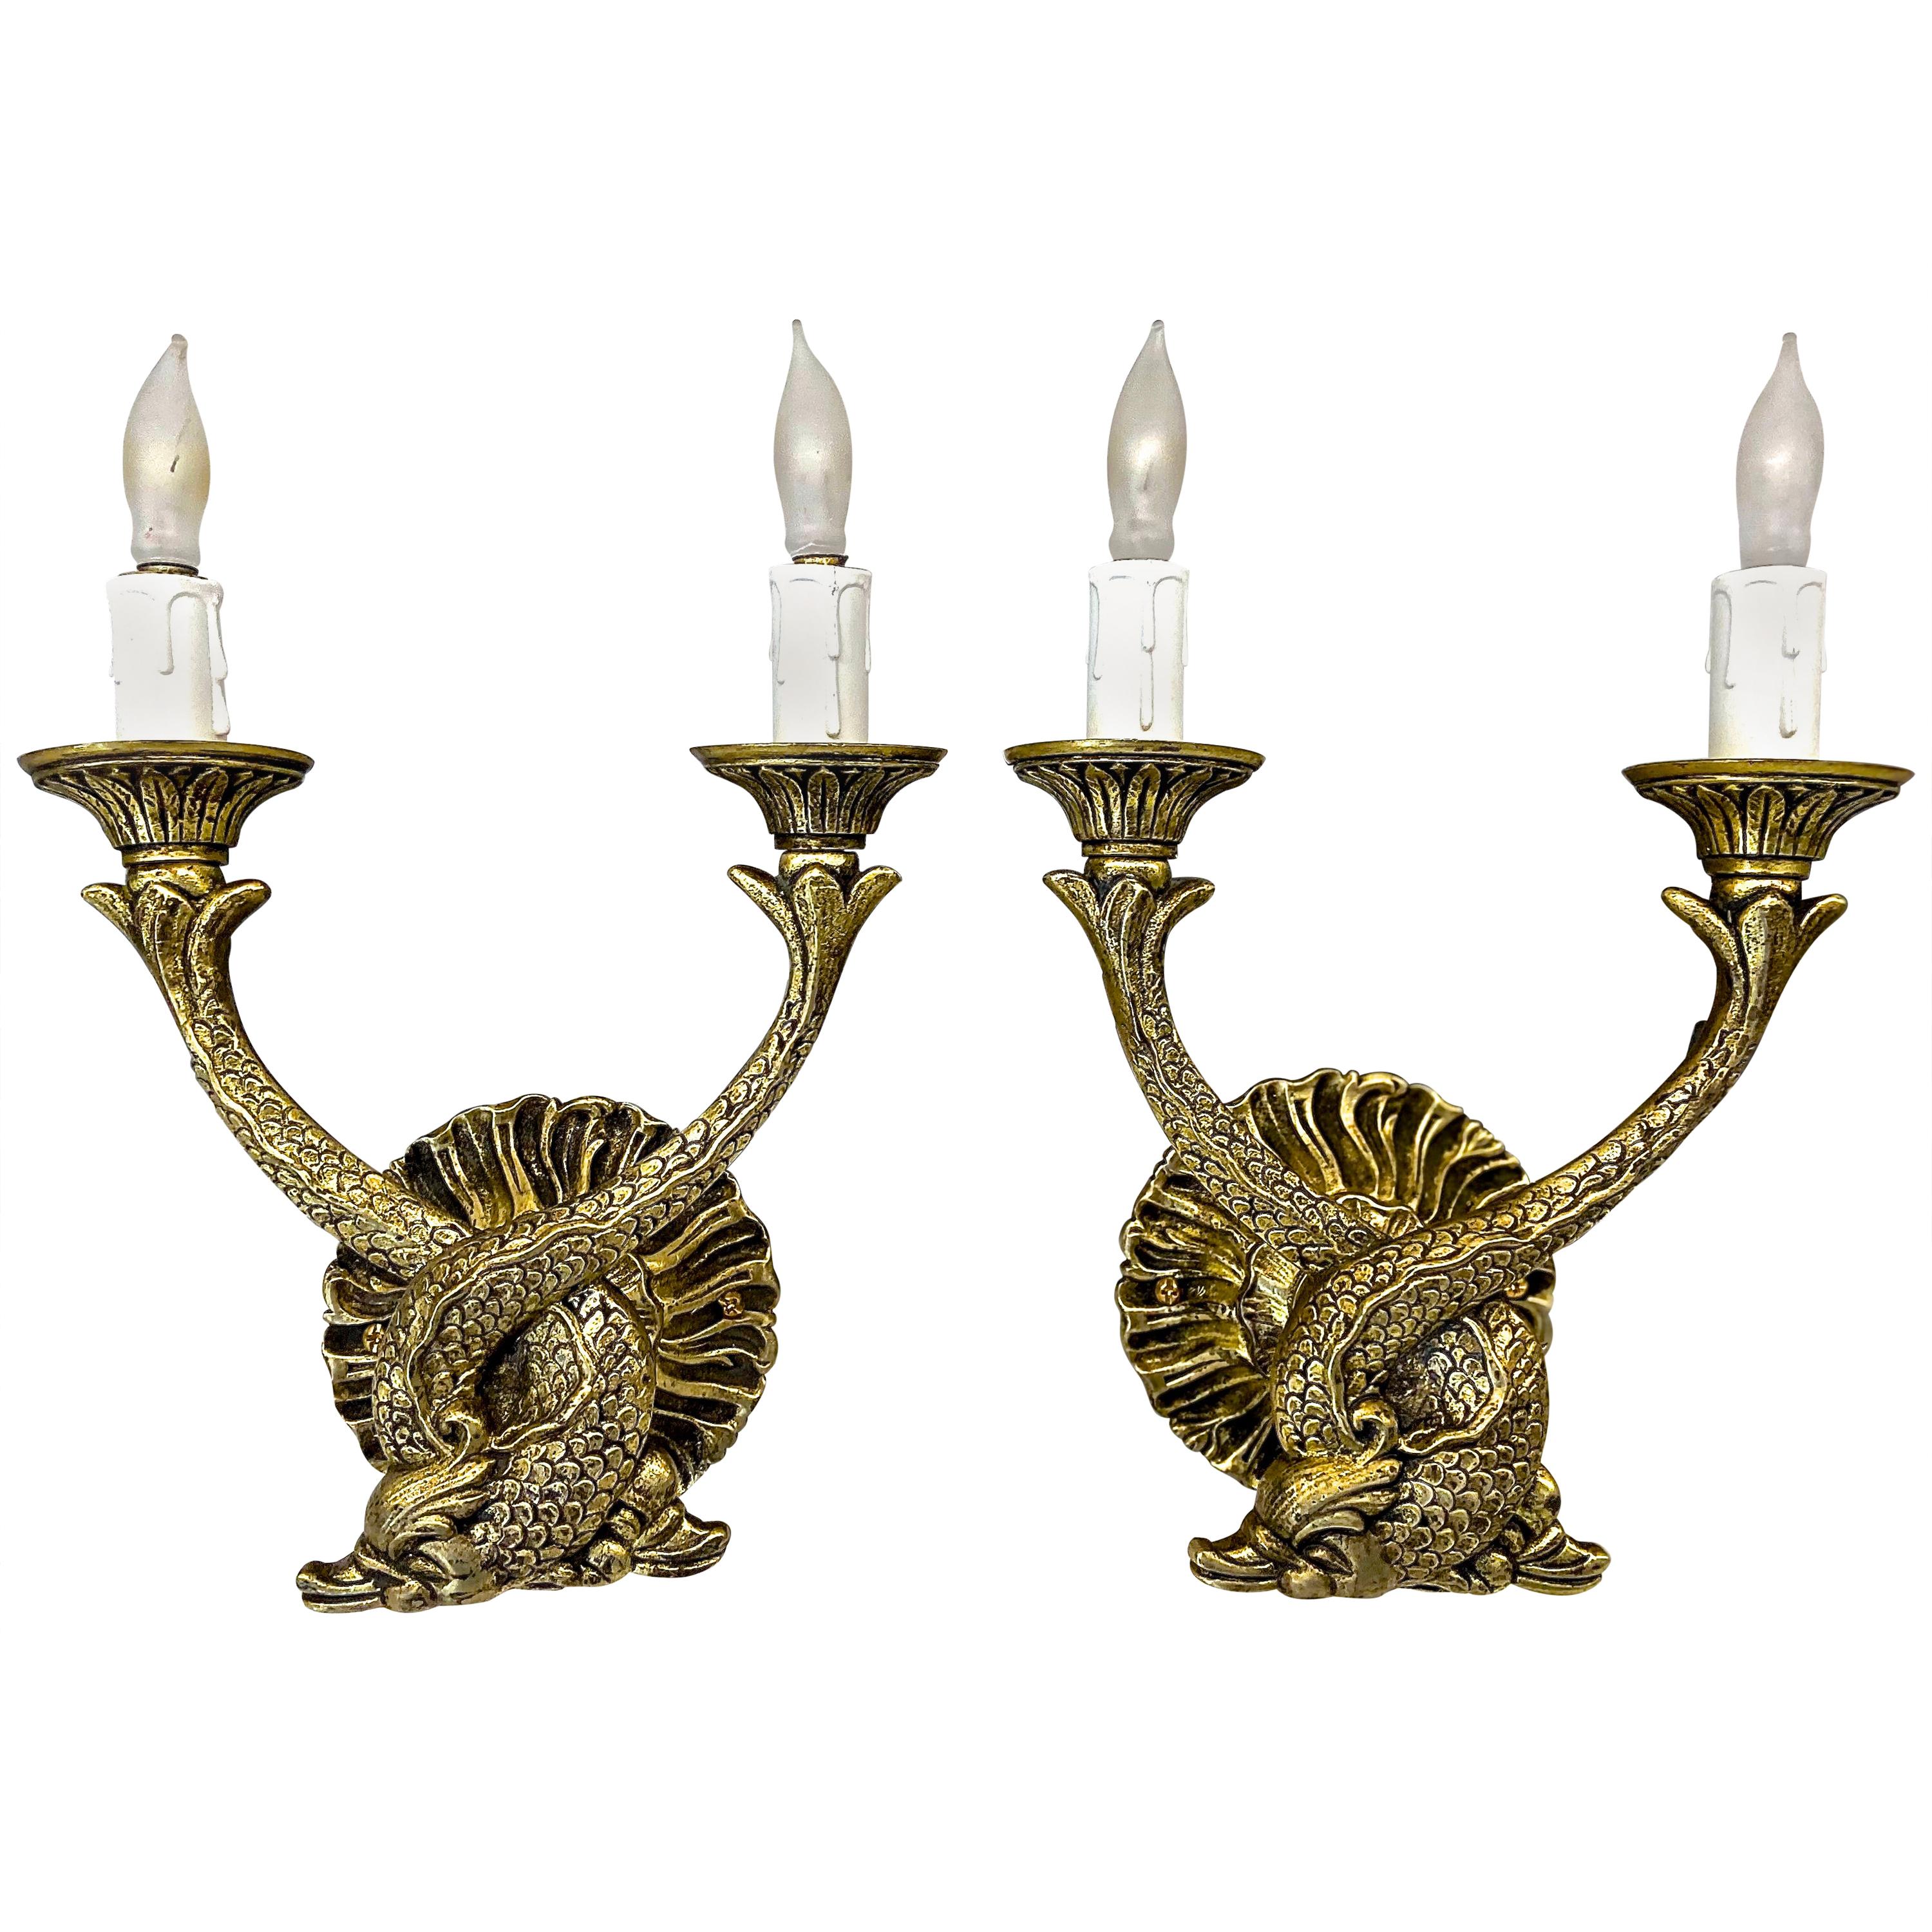 Pair of French Neoclassic Dolphin Brass Wall Sconces